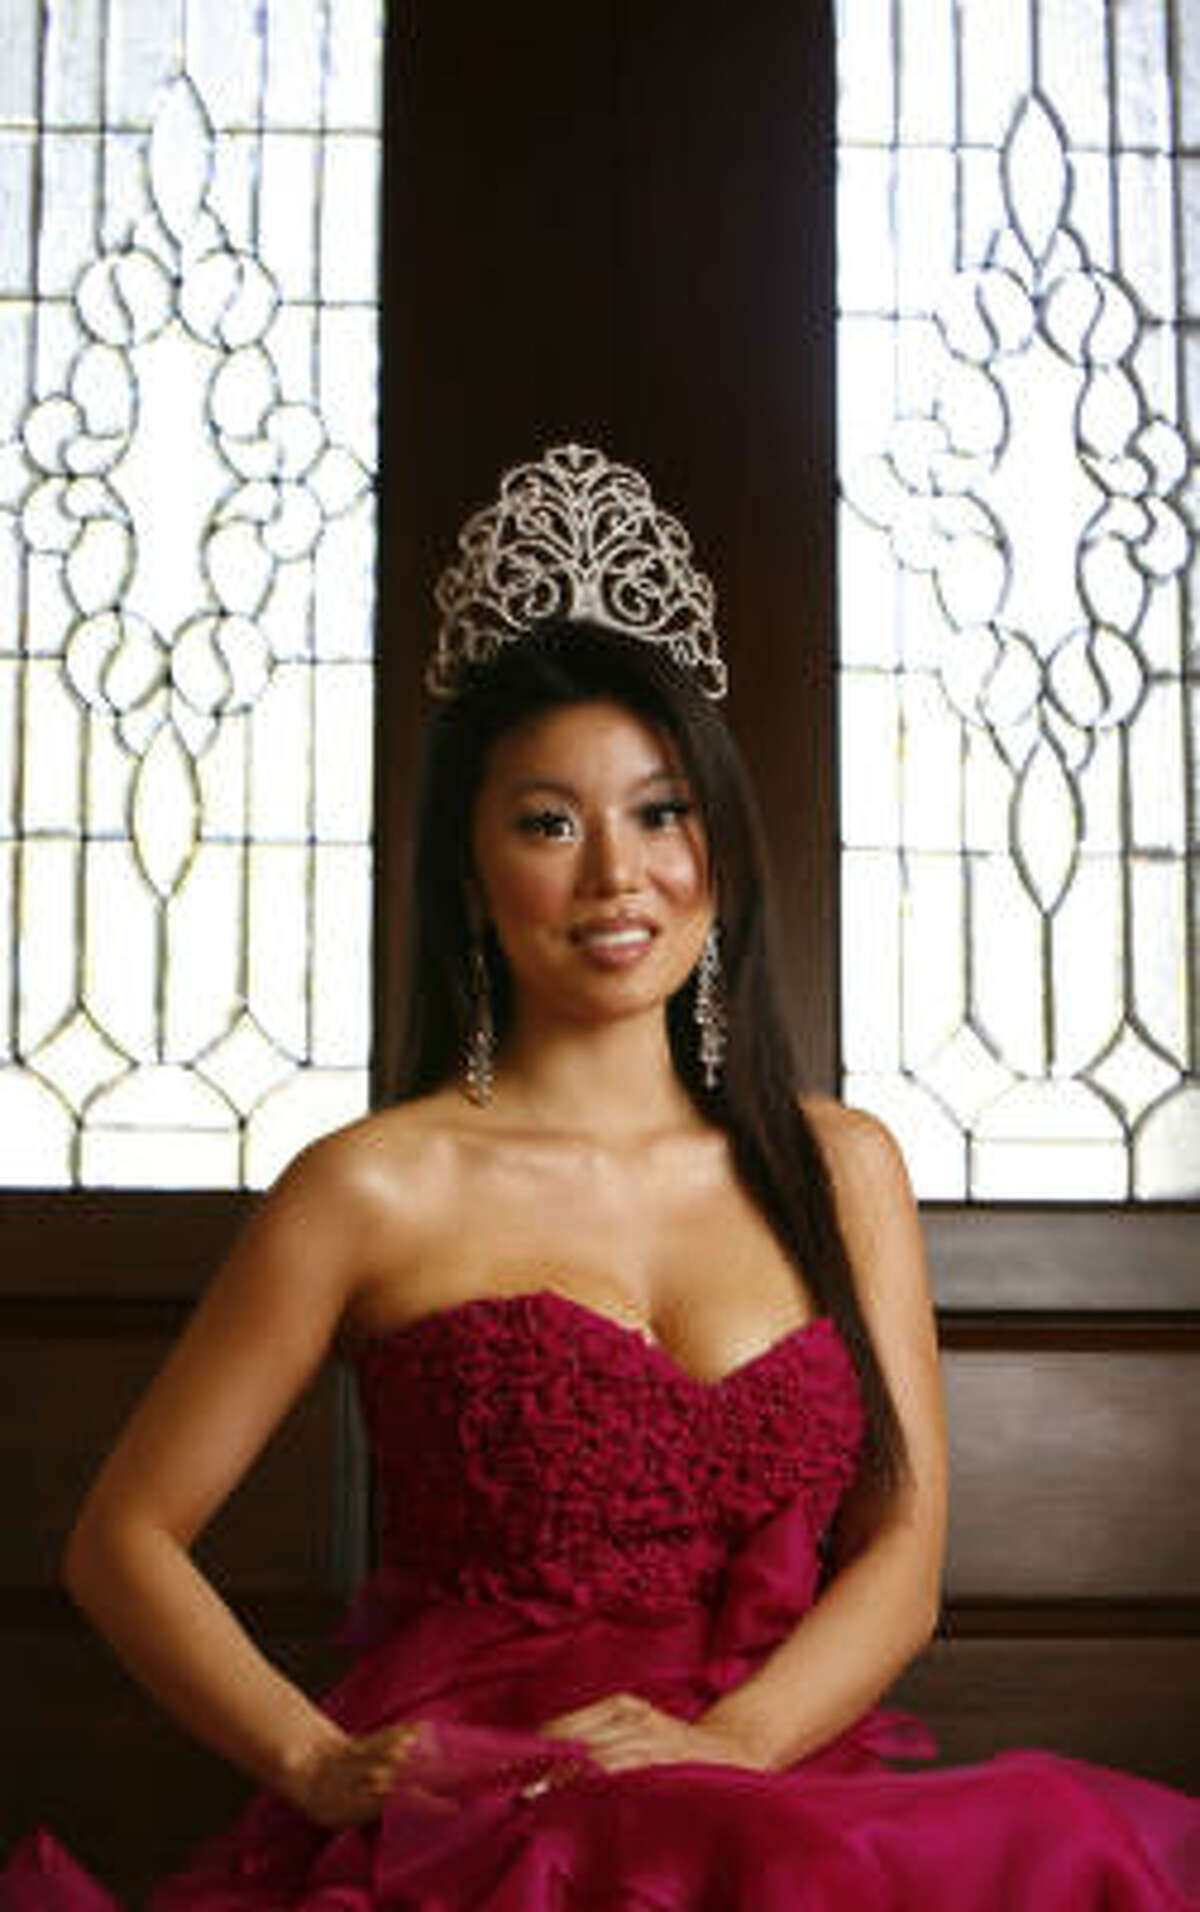 Yoo, who was crowned a few months ago, poses at her home in Katy.